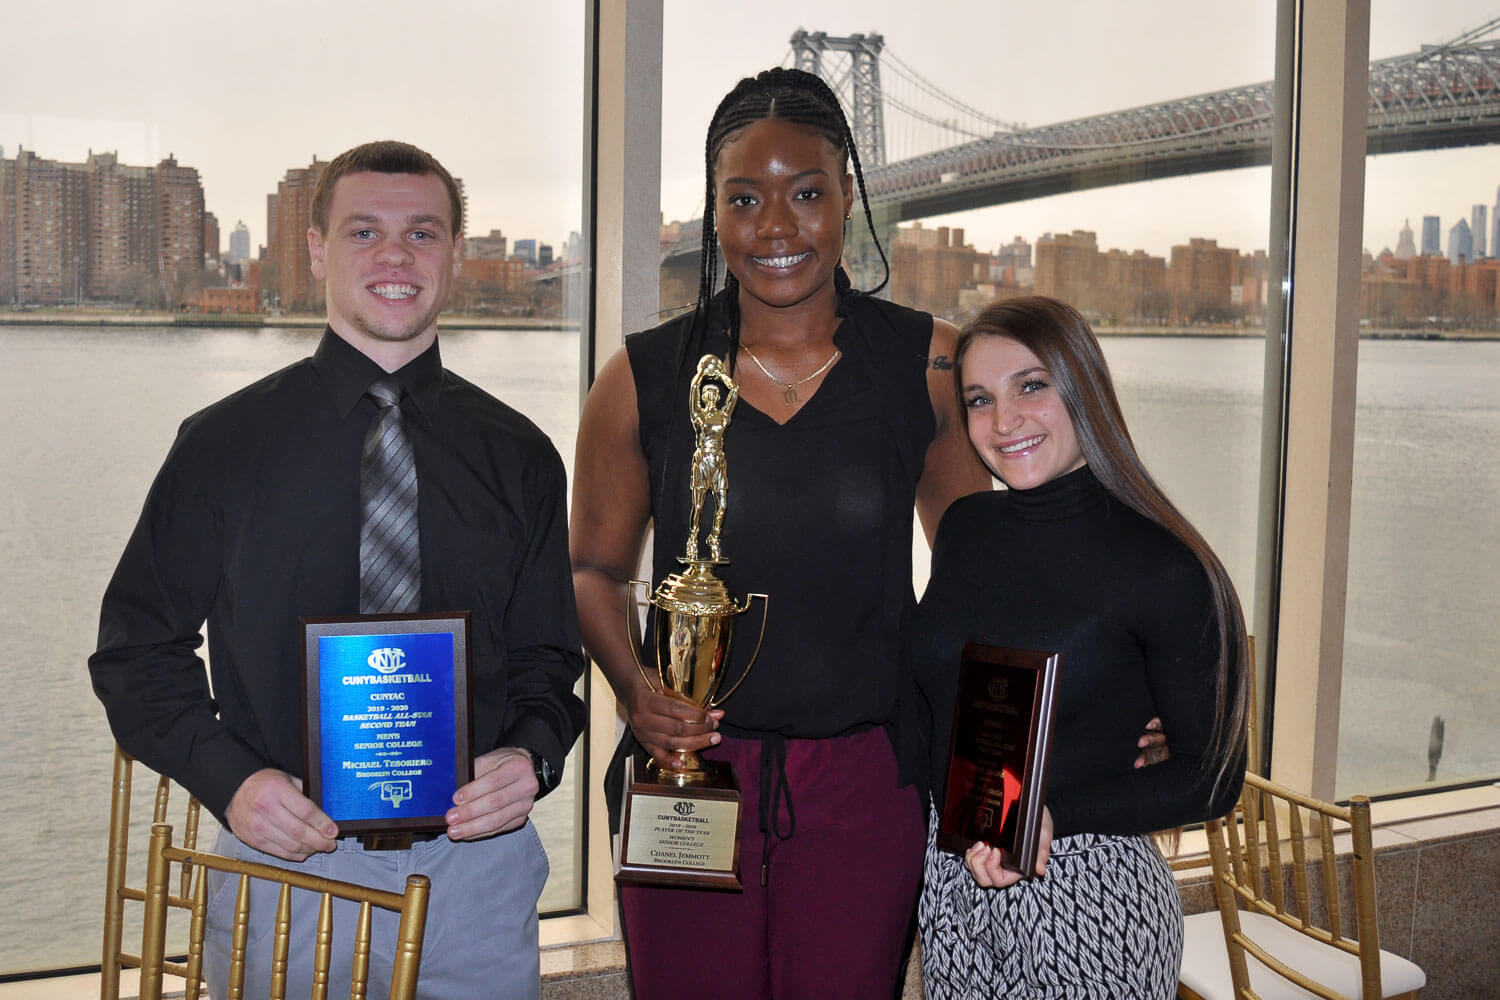 2020 CUNYAC Basketball Awards Luncheon: (L–R) Michael Tesoriero (CUNYAC Men's Basketball Second Team All-Star); Chanel Jemmott (CUNYAC Women's Basketball Player of the Year); and Taylor George (CUNAC Women's Basketball First Team All-Star)